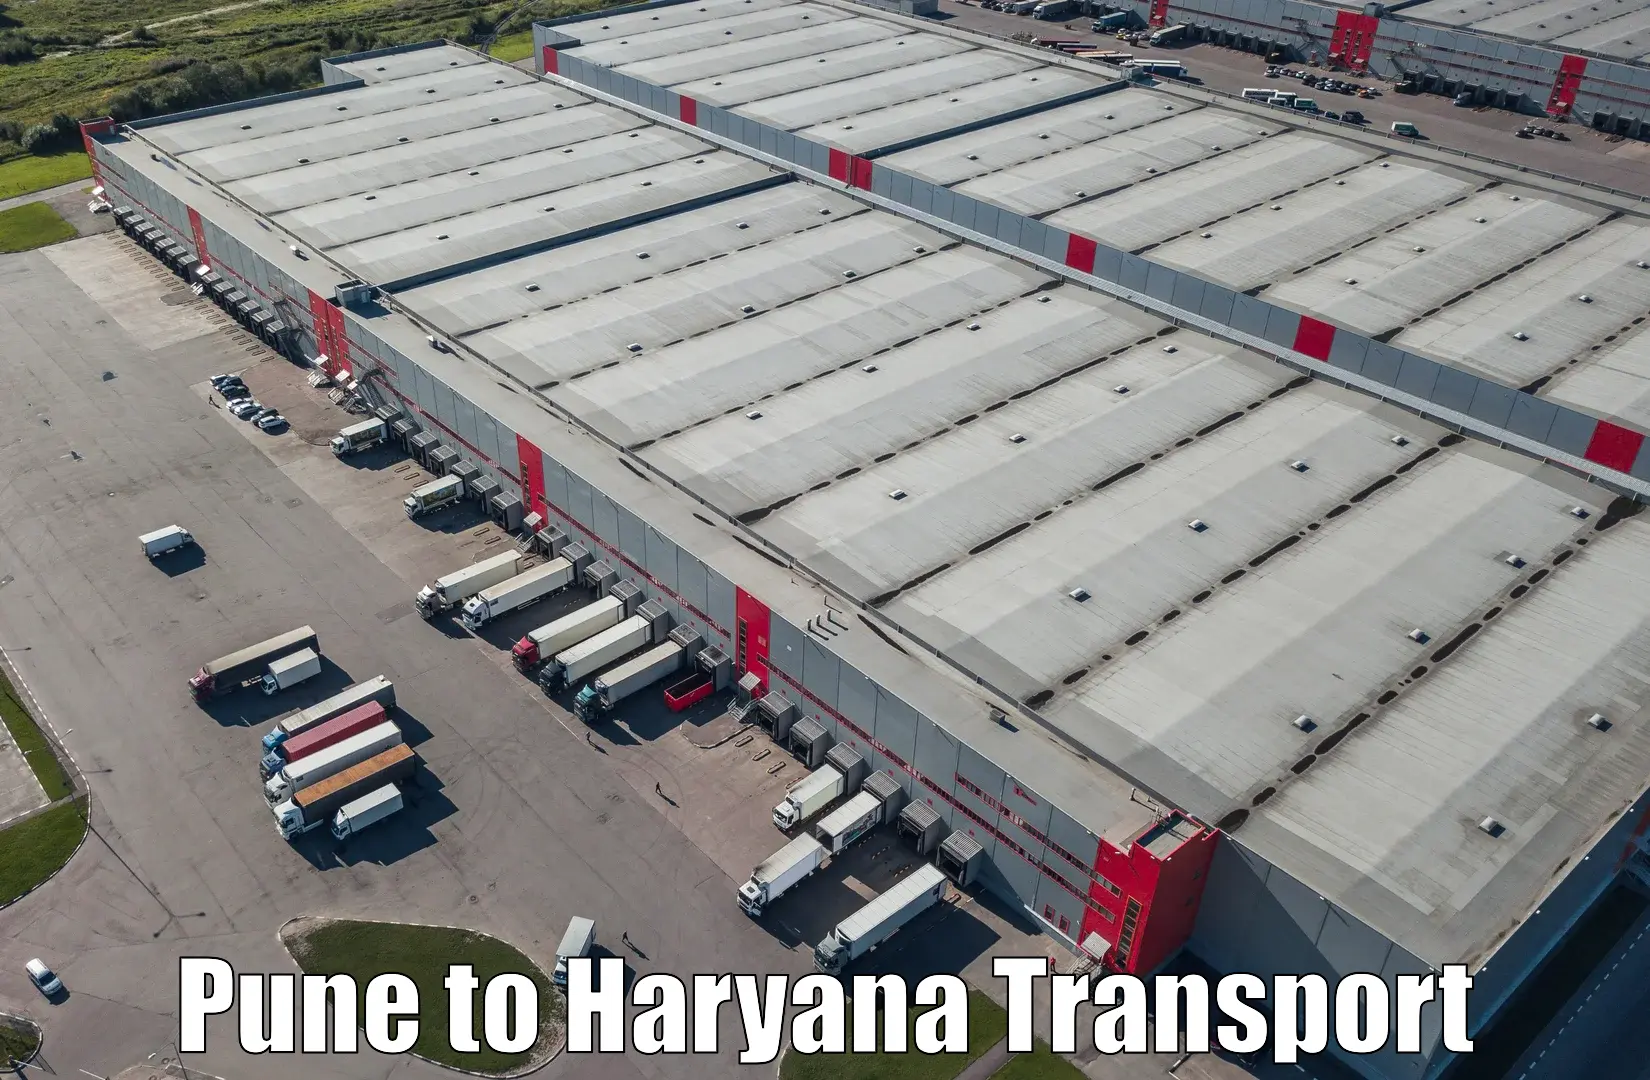 Best transport services in India Pune to NCR Haryana